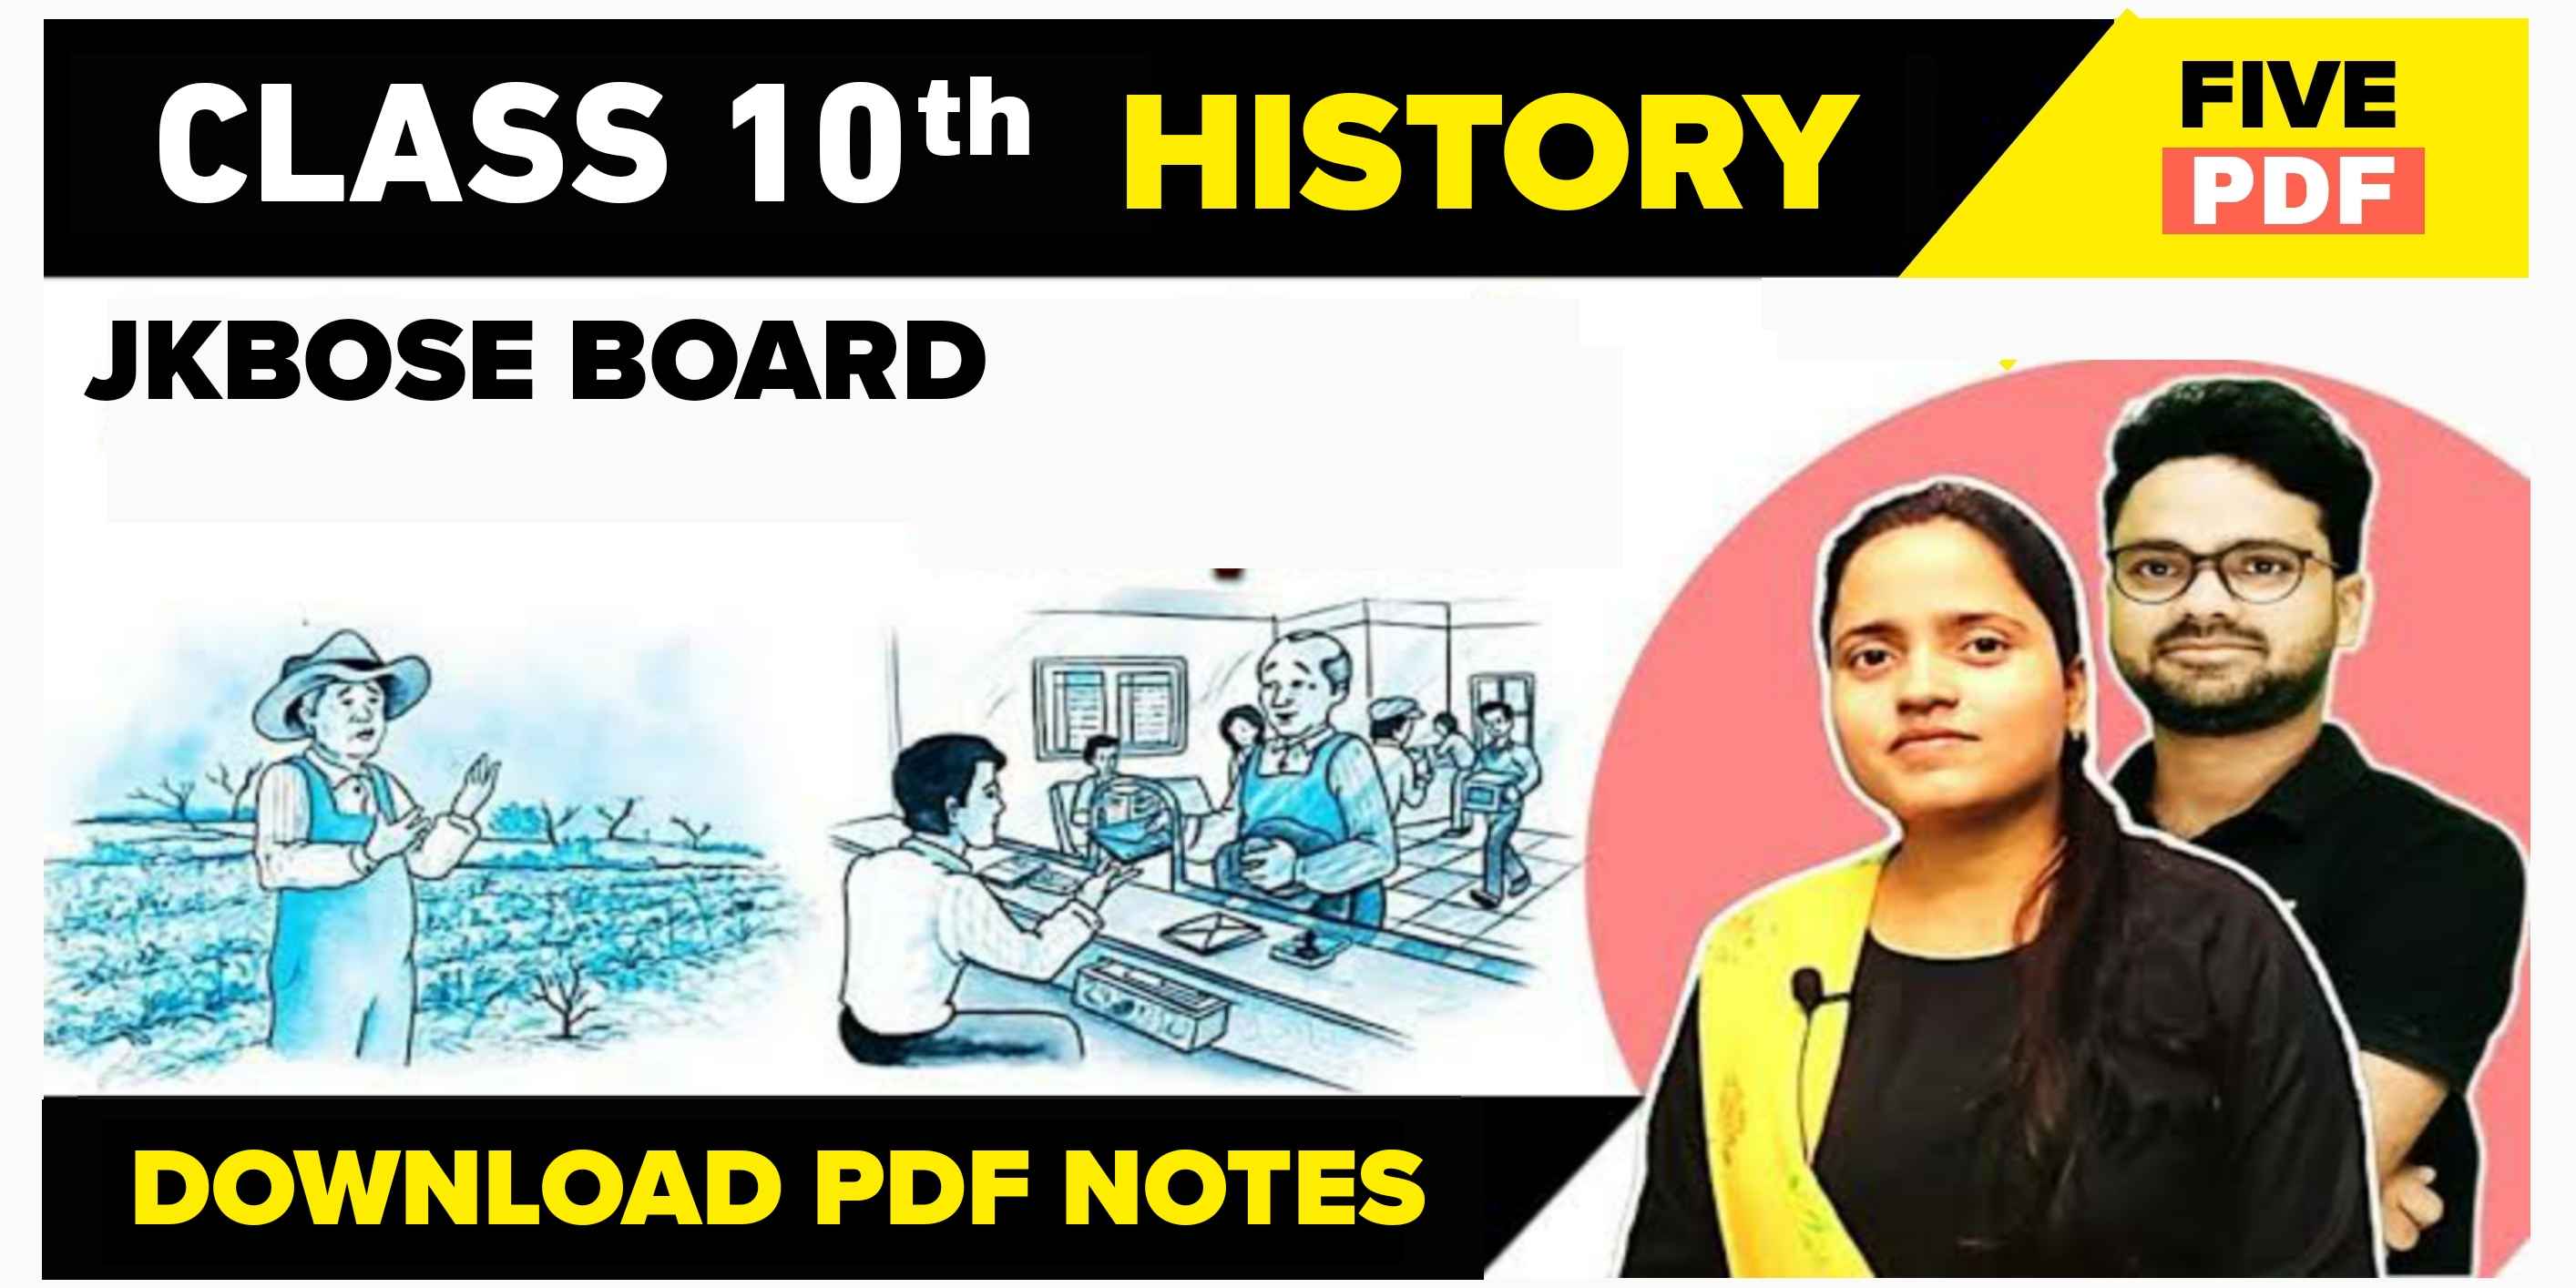 JKBOSE Class 10th History Notes PDF Download